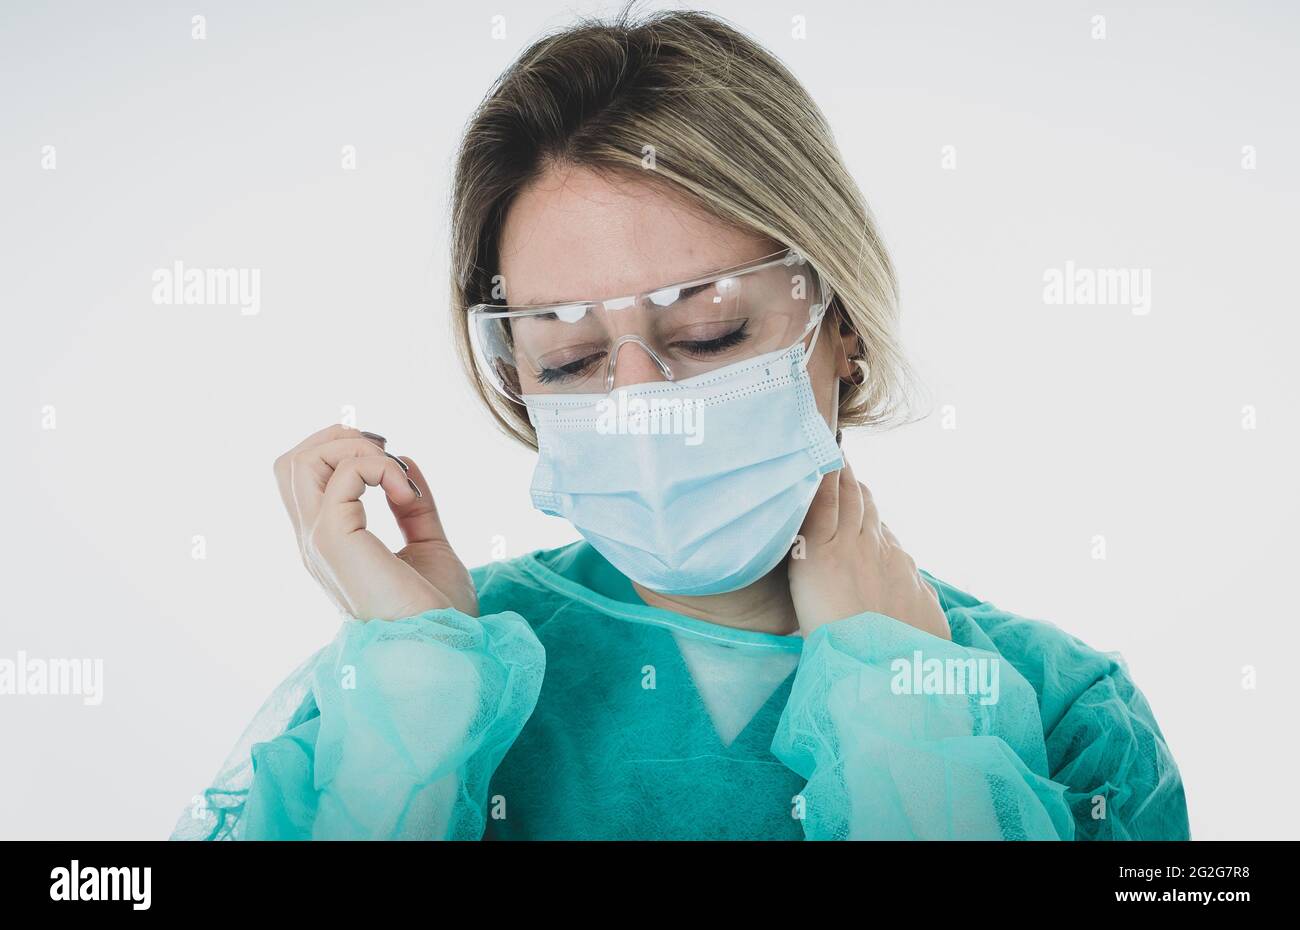 Sad and overwhelmed female doctor or nurse wearing protective face mask. Depressed and tired working at intensive care unit with coronavirus patients. Stock Photo